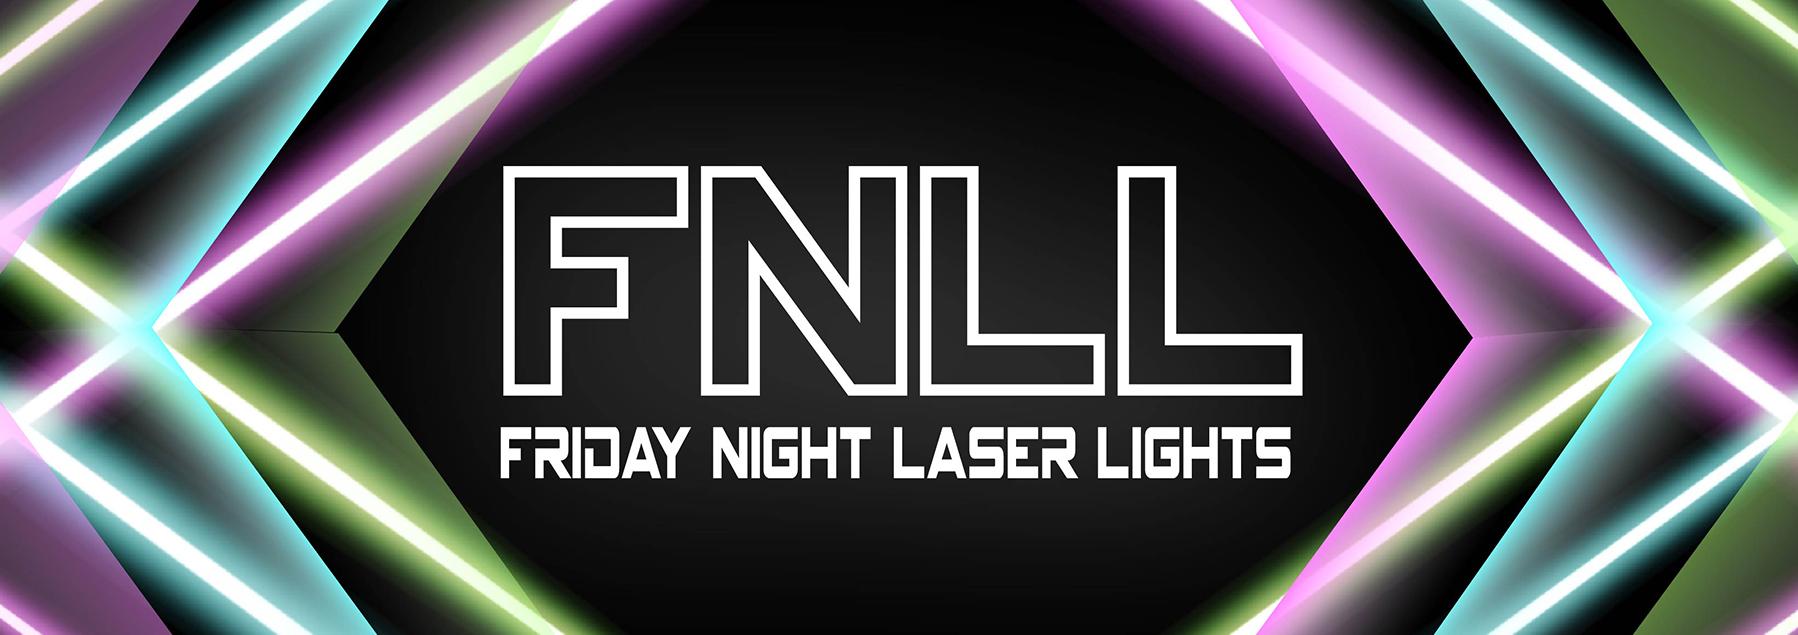 Friday Night Laser Lights logo with multi colored lasers on a black background